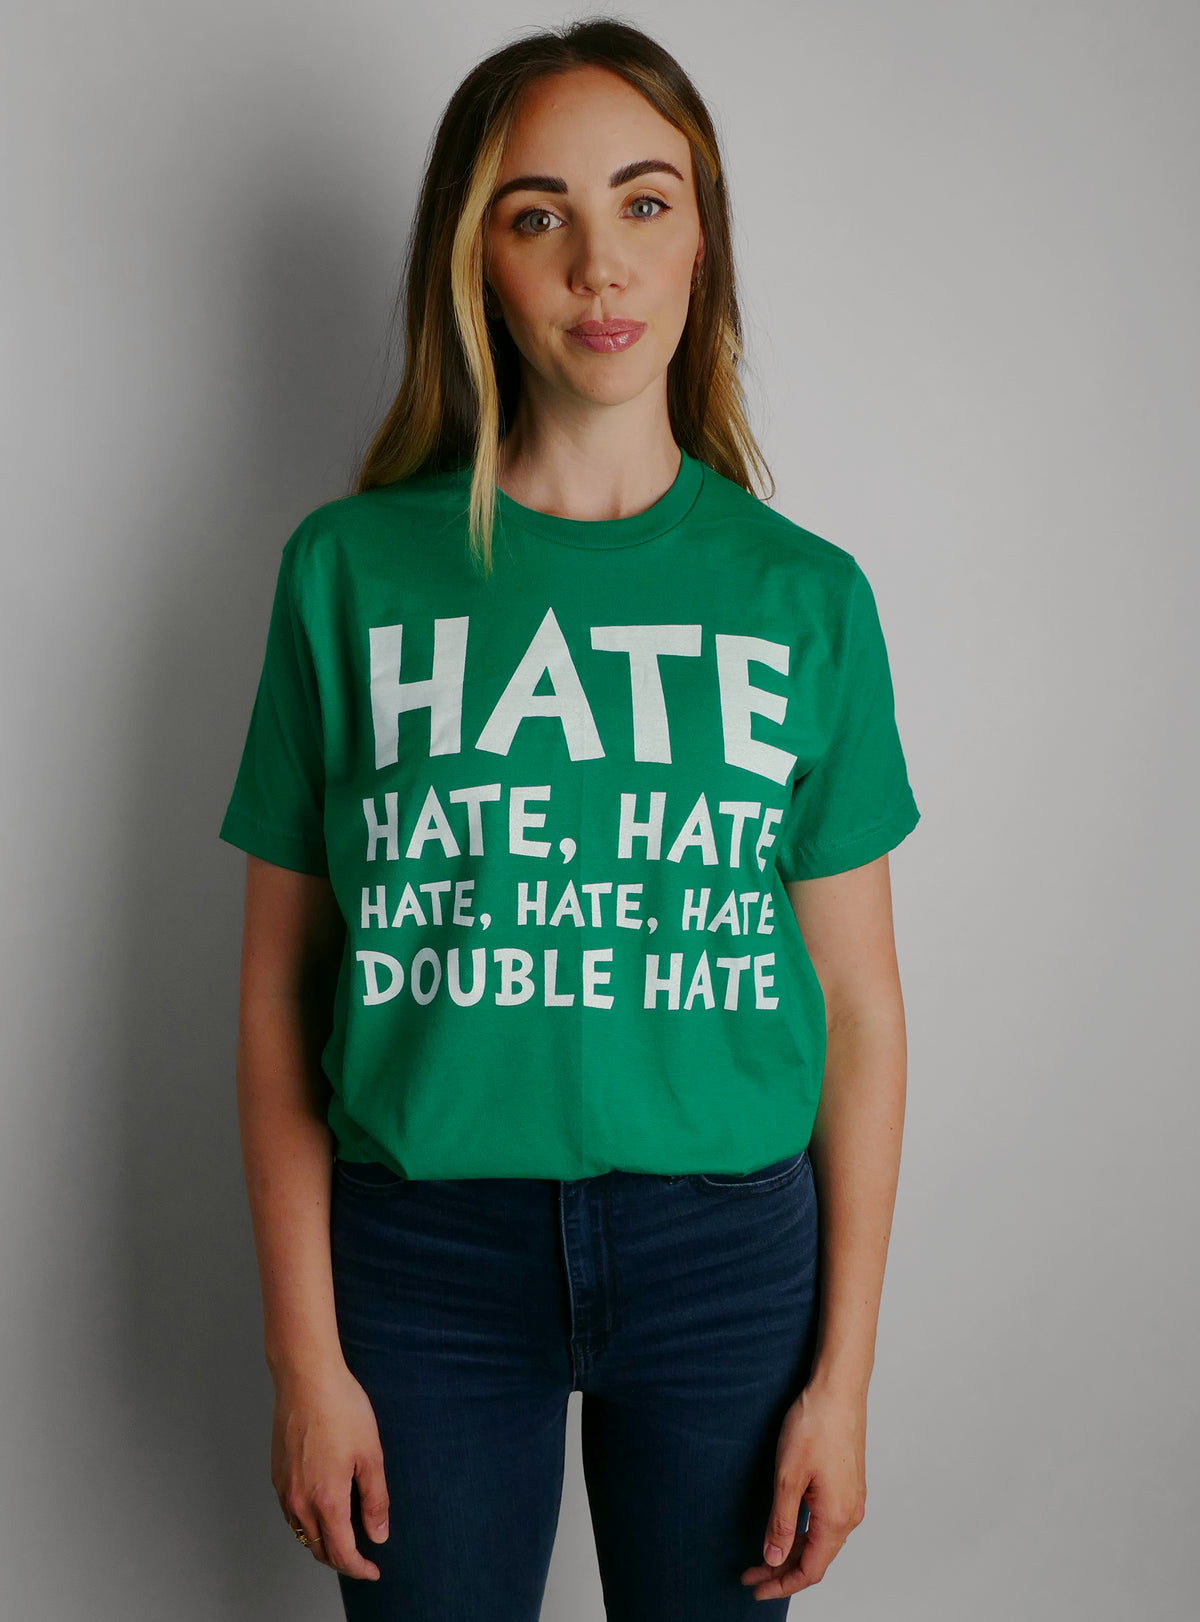 Hate + Loathe Entirely Matching T-Shirt Set